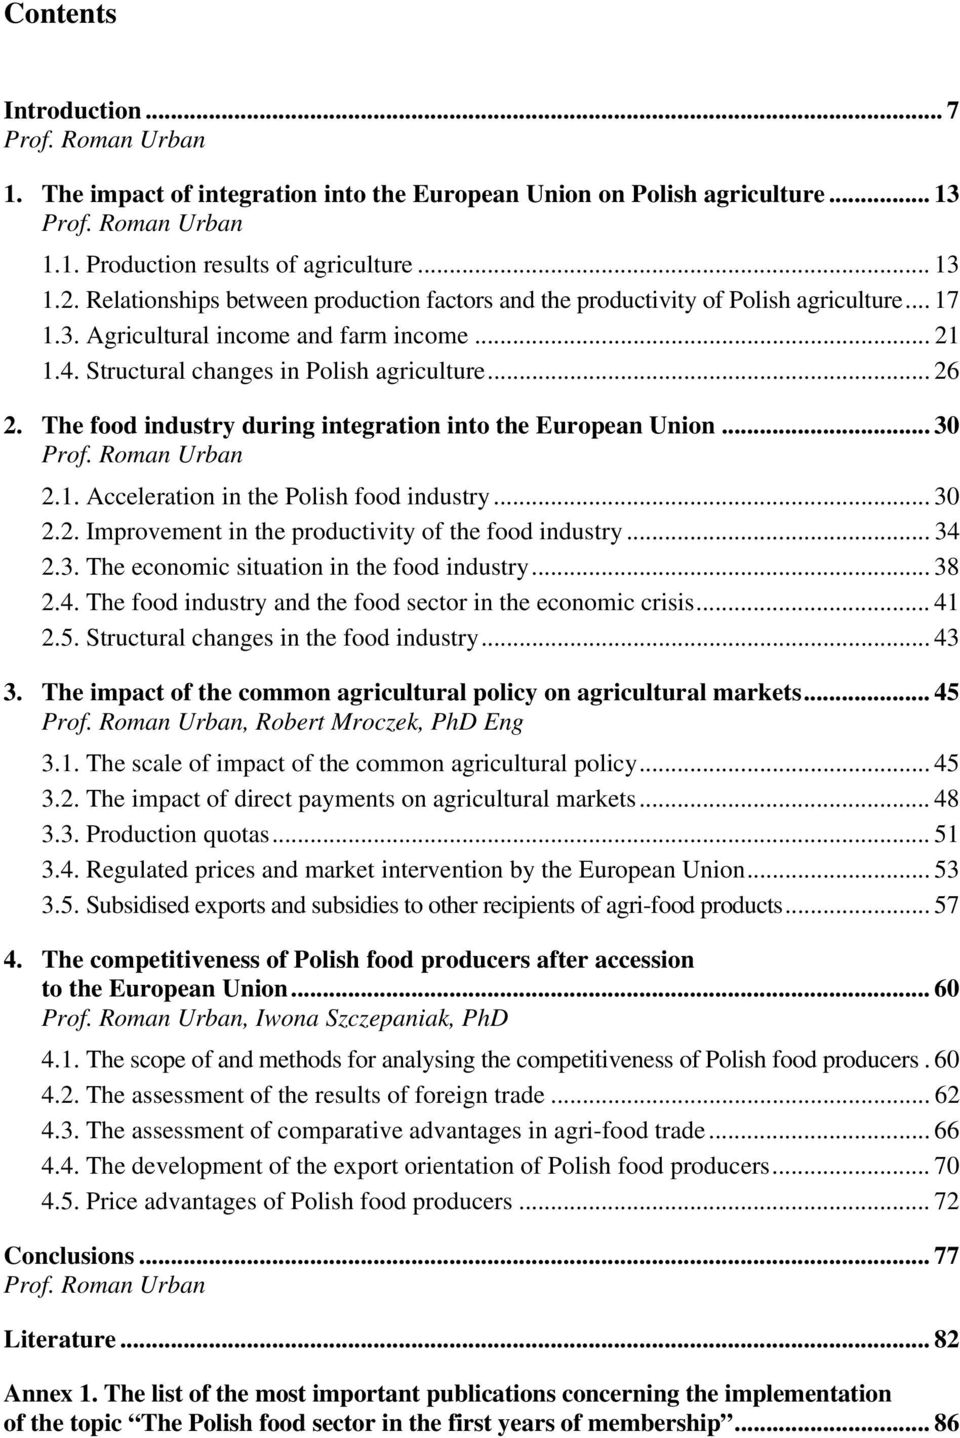 The food industry during integration into the European Union... 30 Prof. Roman Urban 2.1. Acceleration in the Polish food industry... 30 2.2. Improvement in the productivity of the food industry.